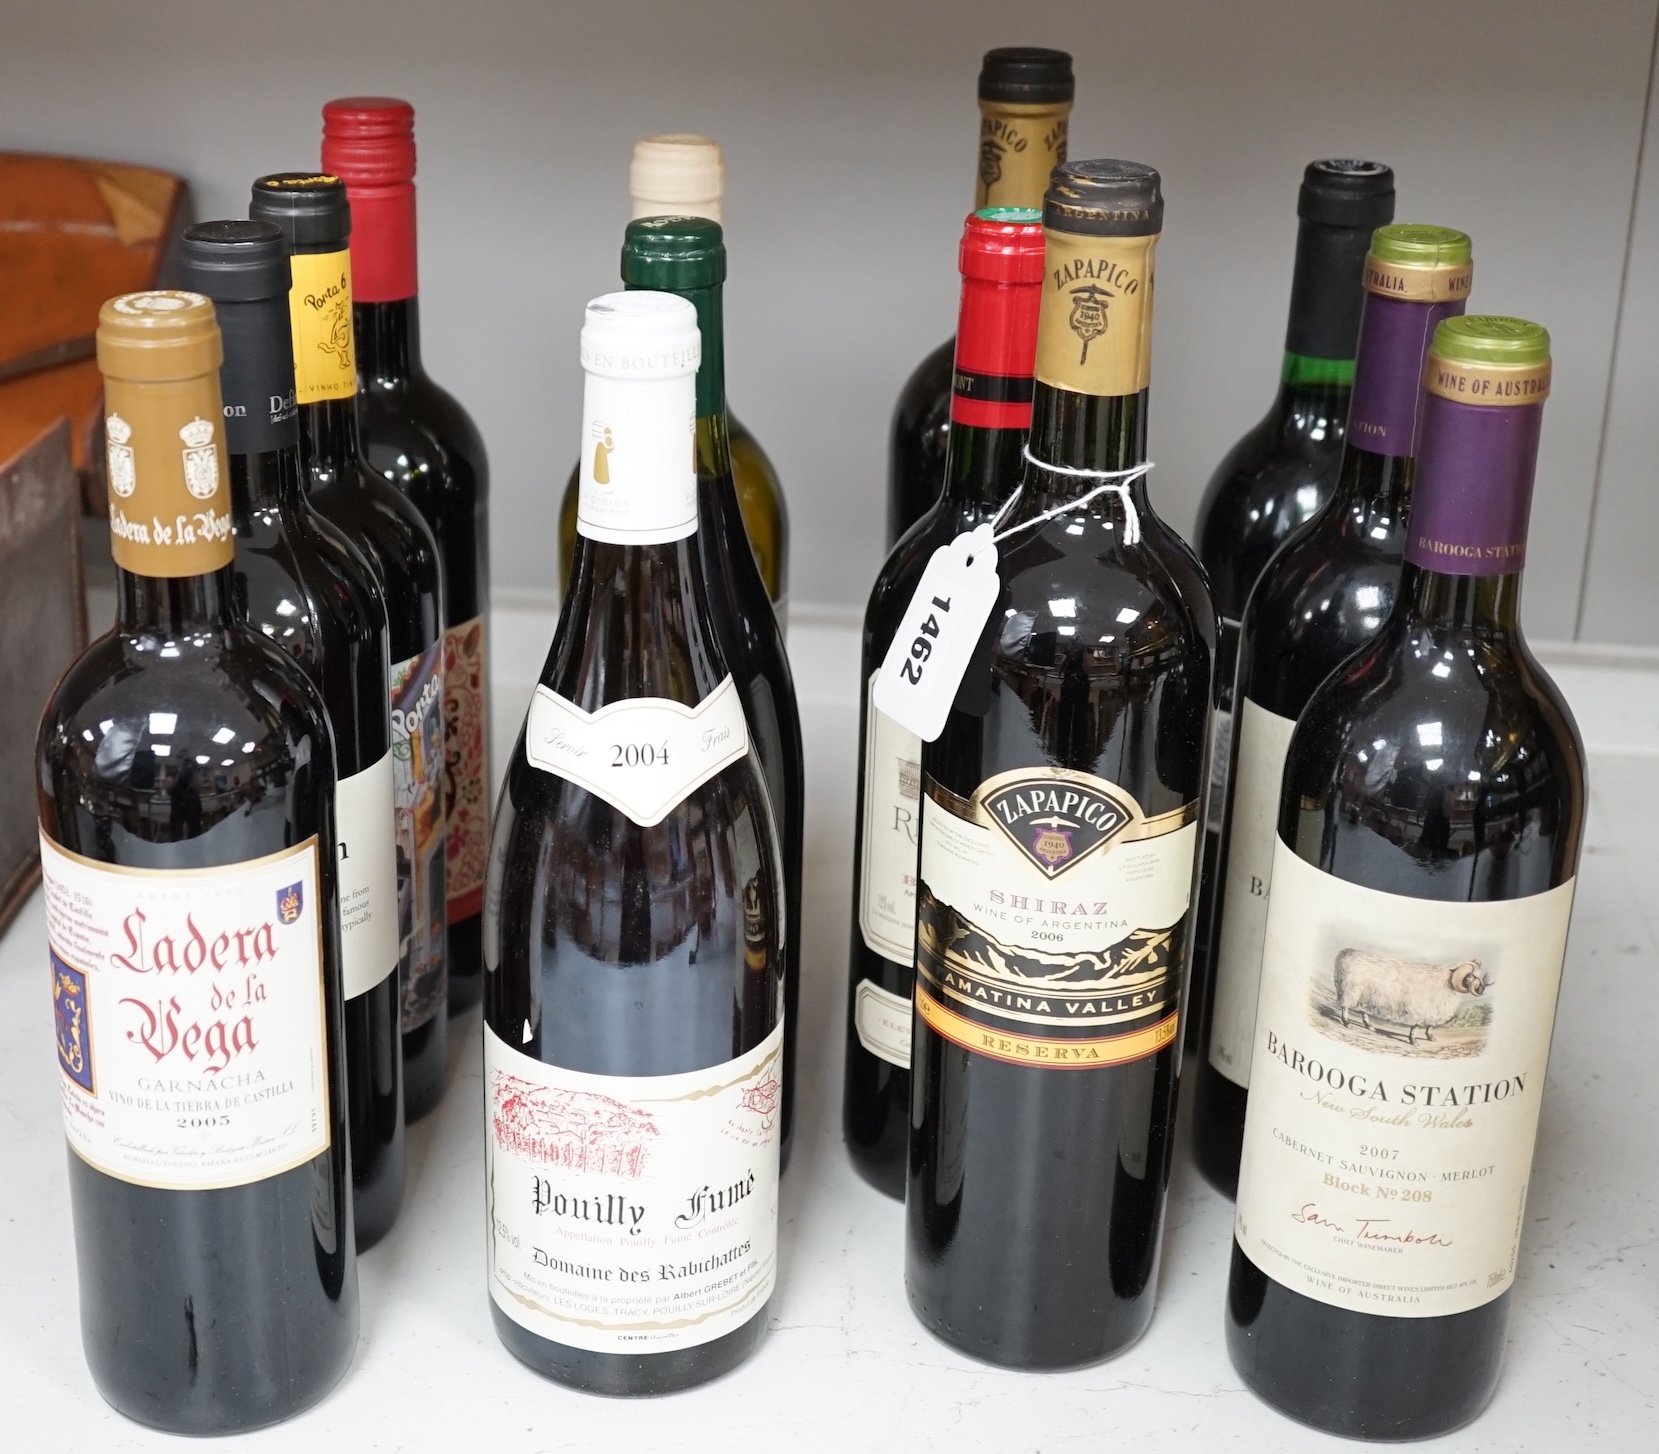 A quantity of various bottles of wine to include Barooga Station, merlot 2007 and Zapapico Shiraz 2006. Condition - fair, storage history unknown